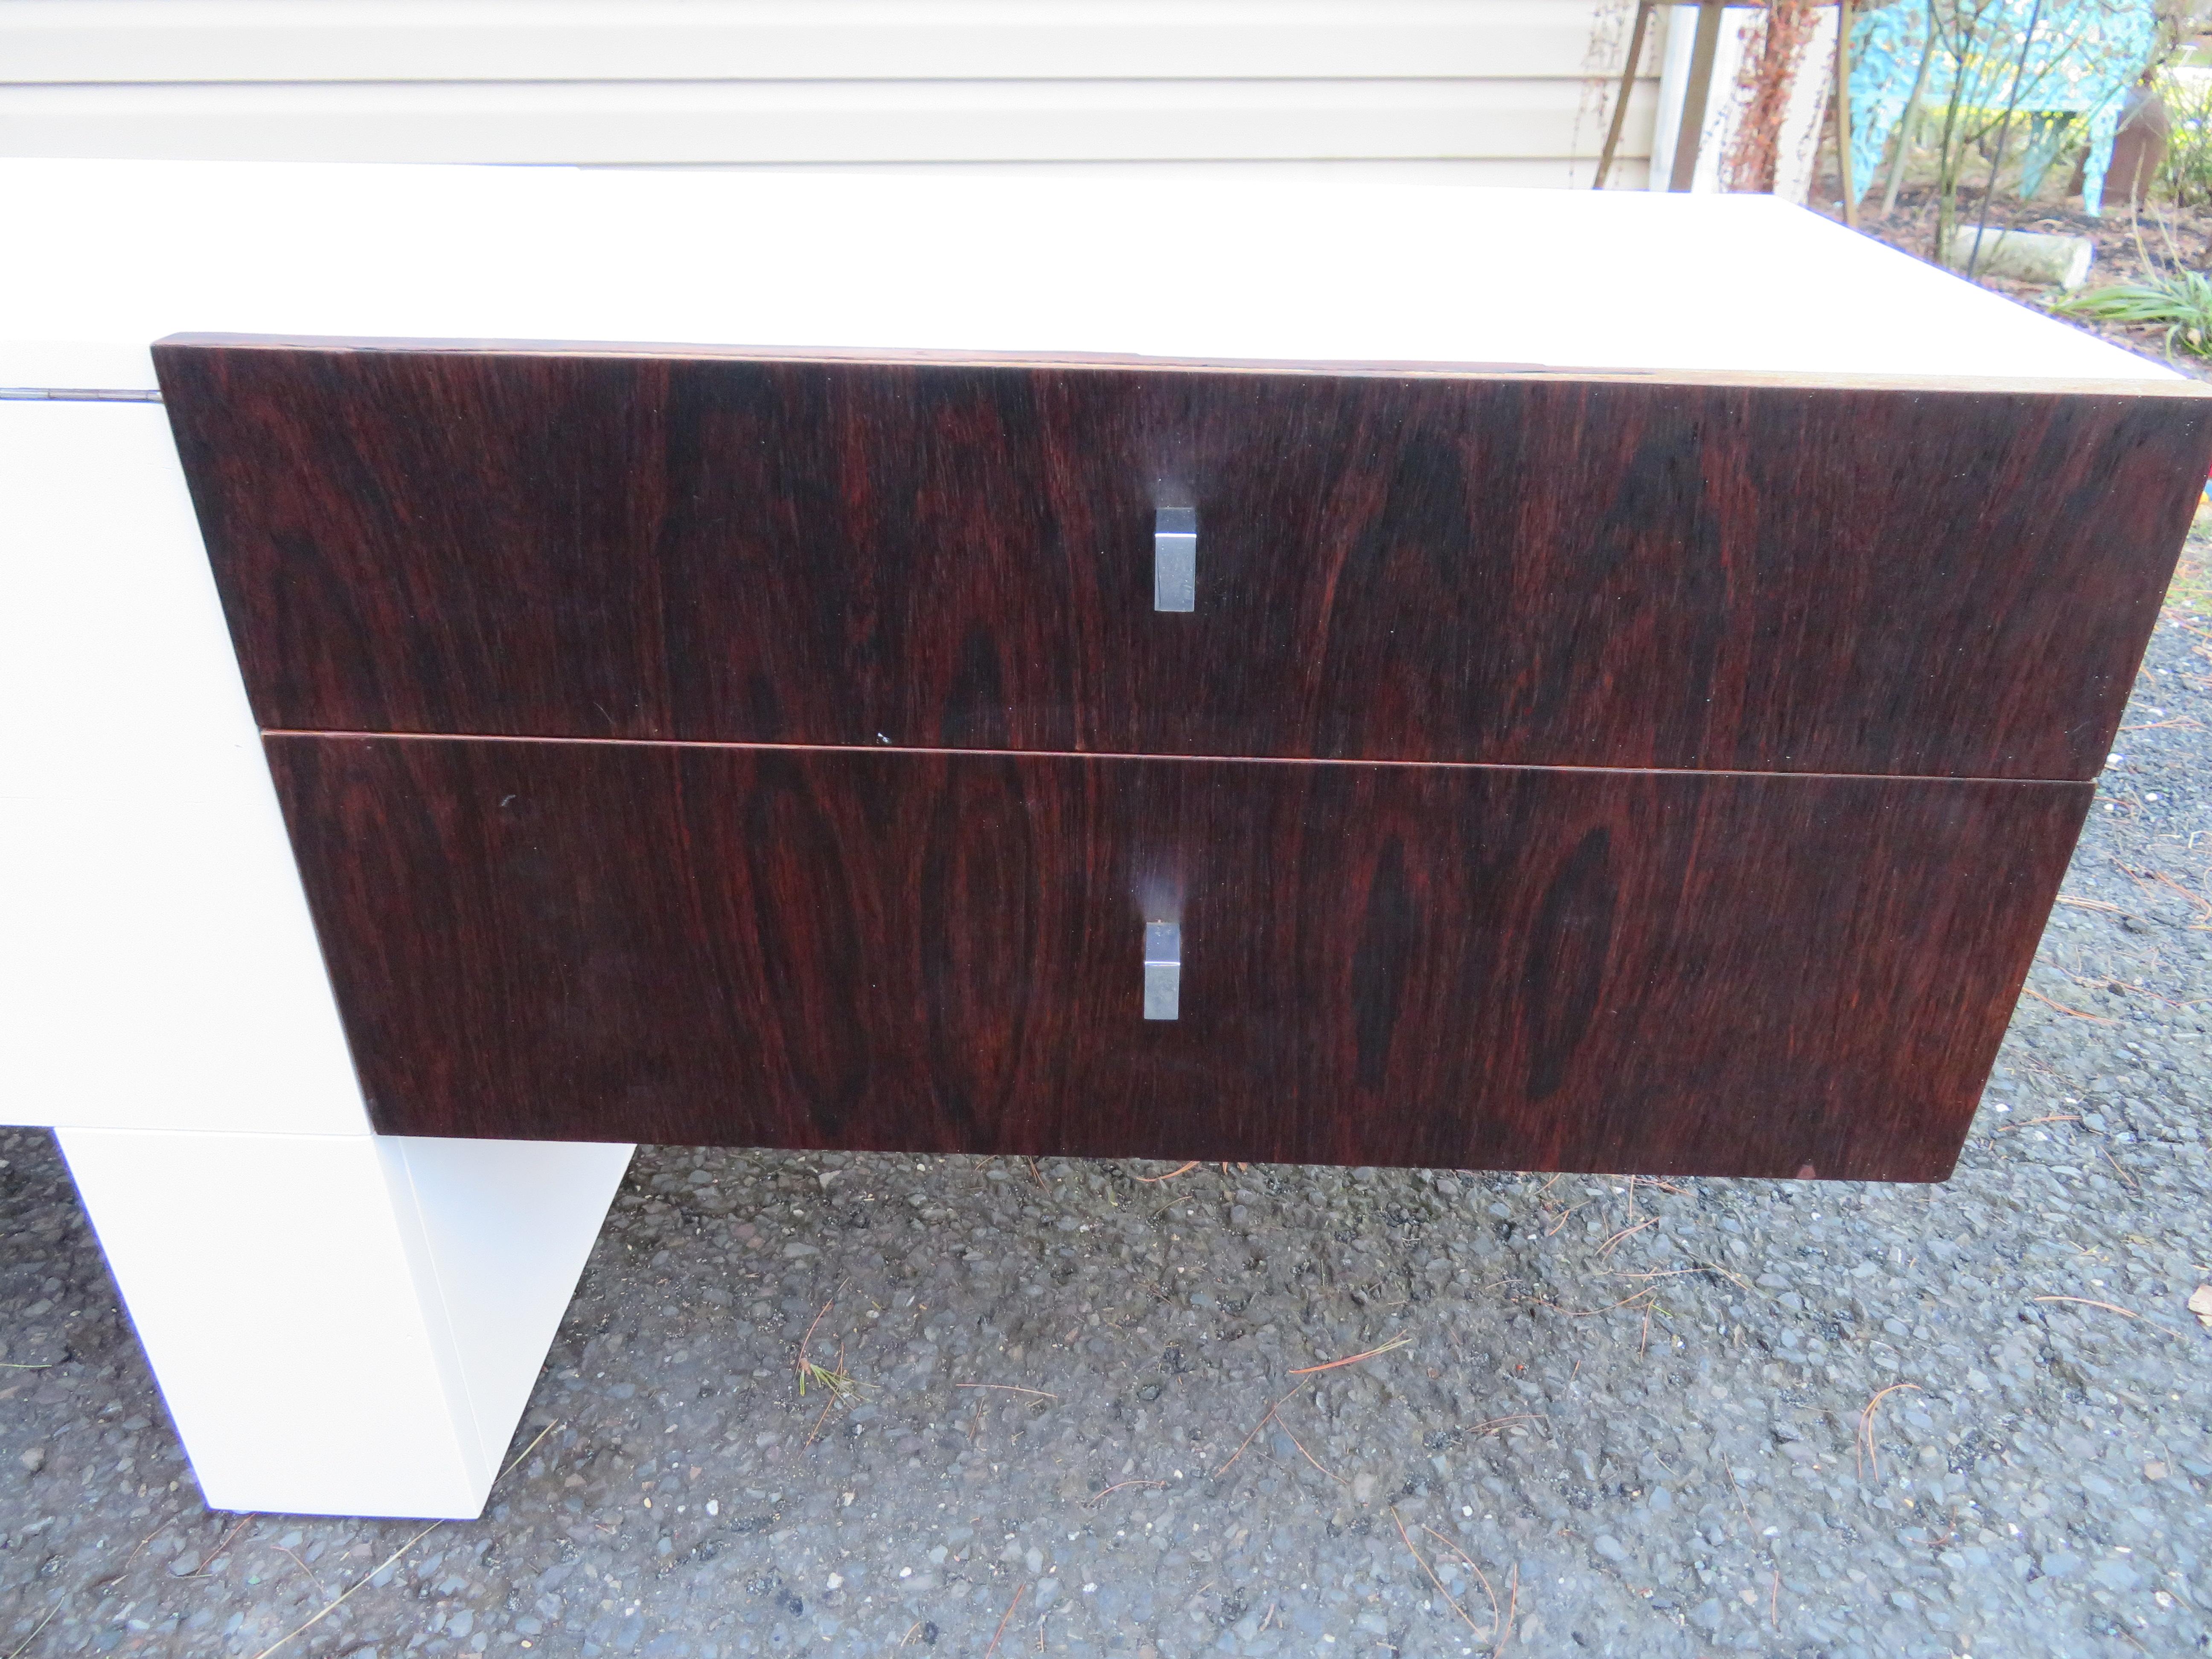 Sleek Rosewood Lacquer Rougier Kingsize Bed Headboard Night Stands Mid-Century For Sale 1